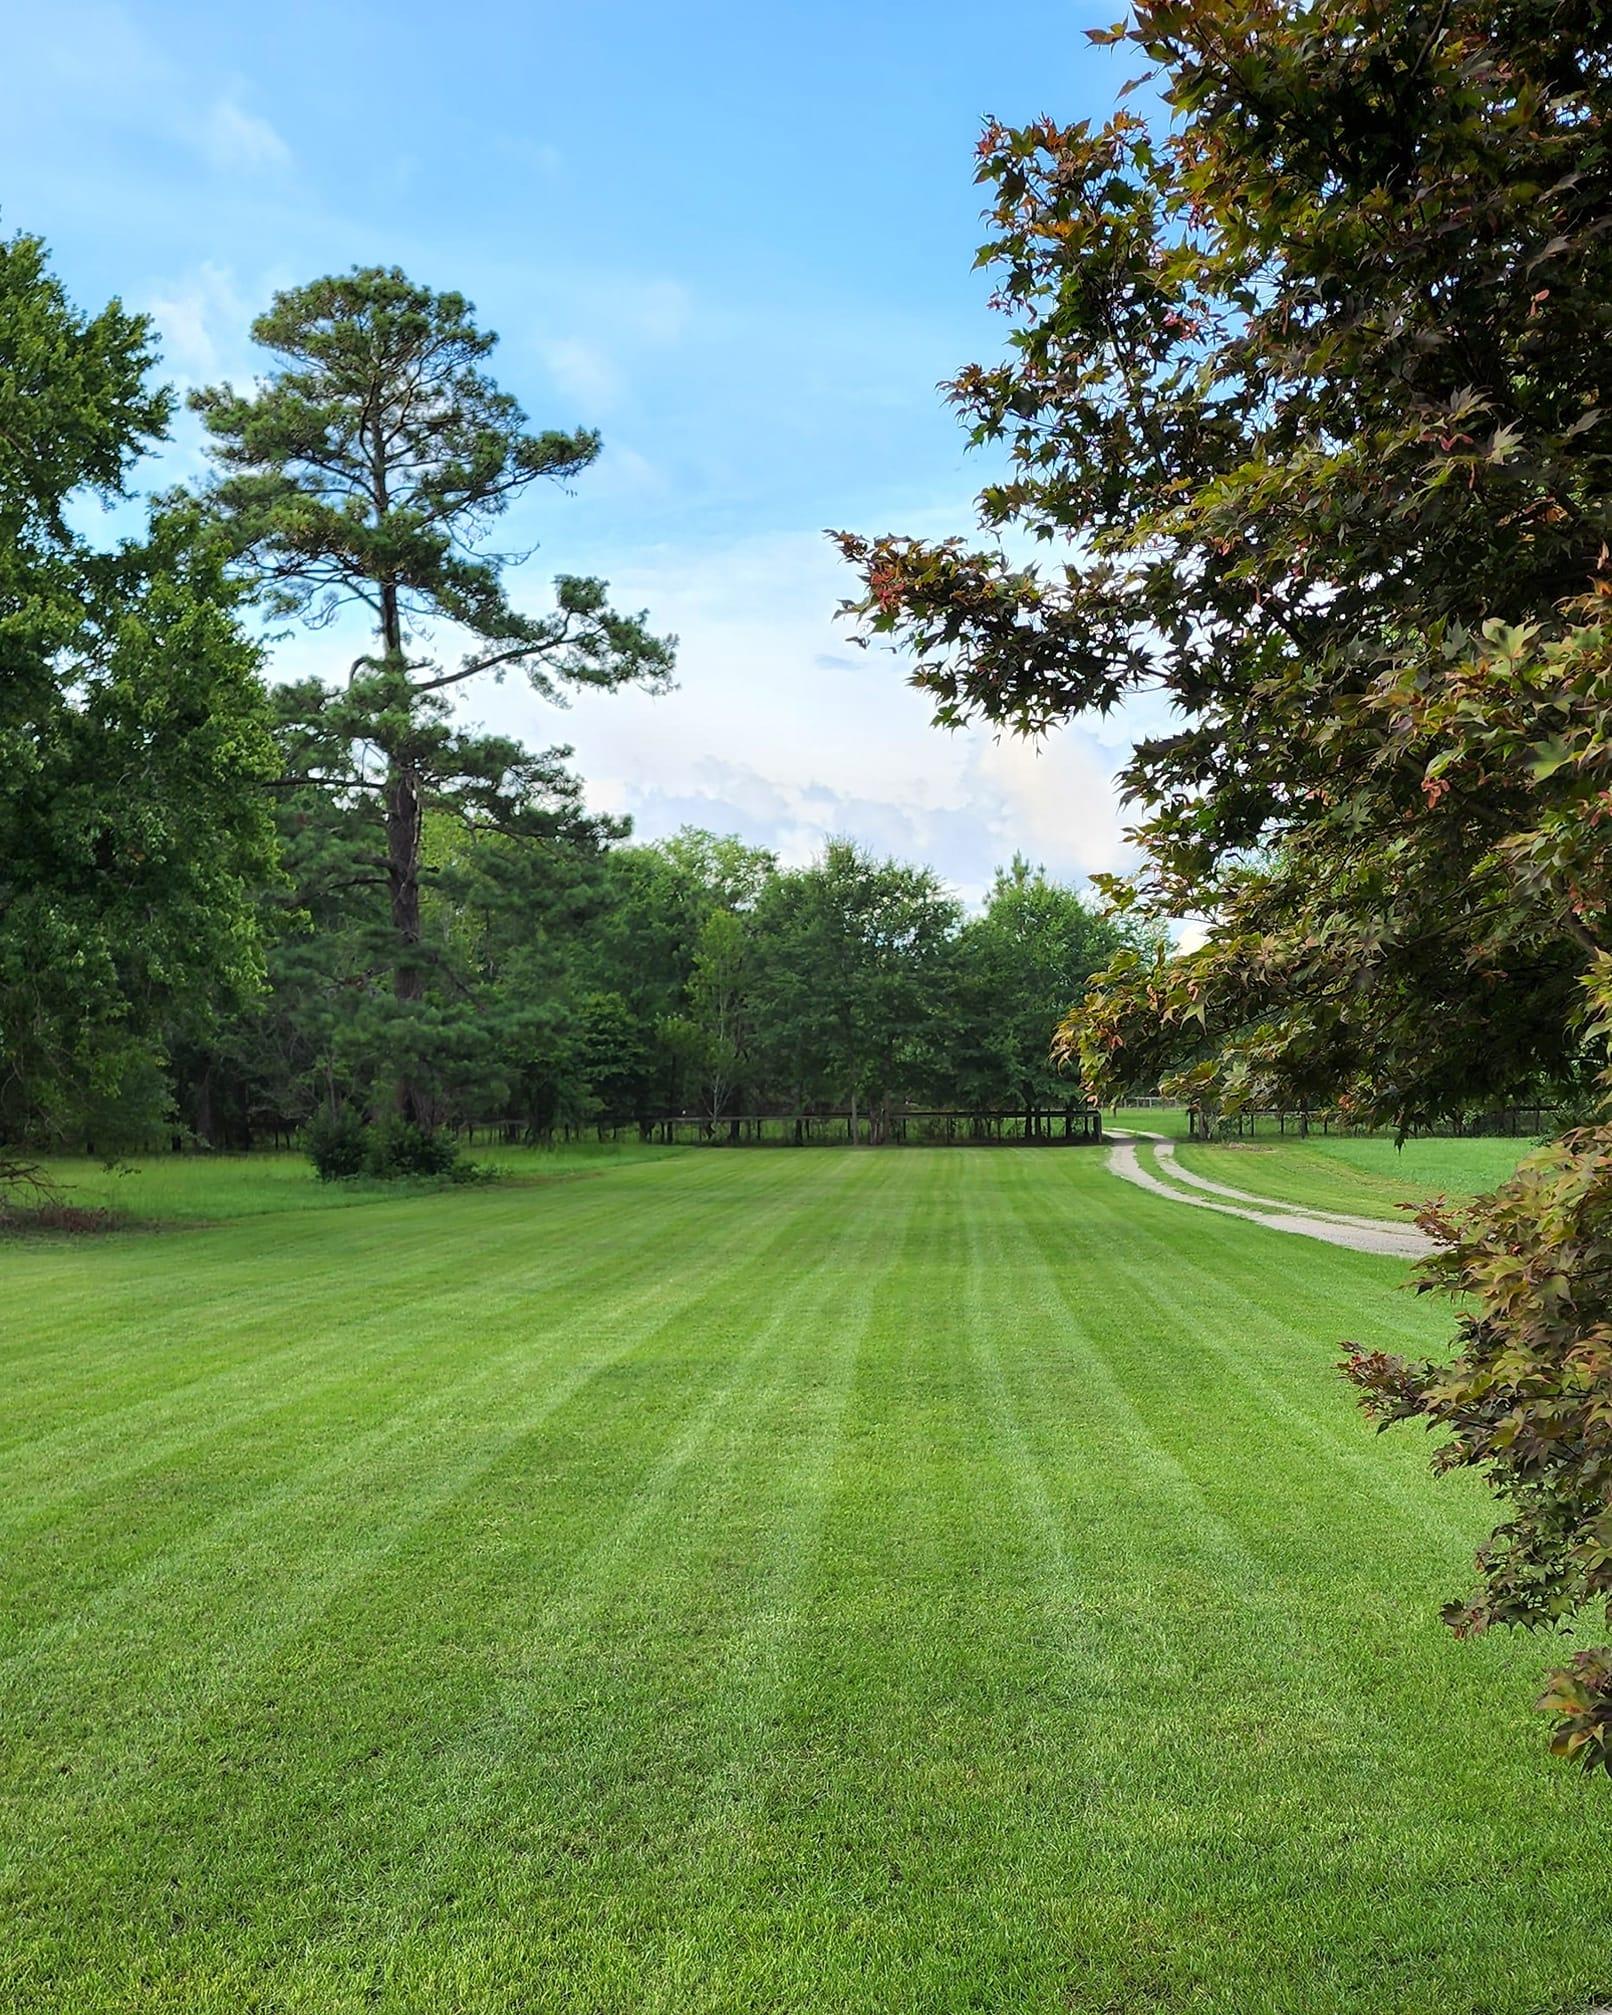 Residential & Commercial Landscaping company Muddy Paws Landscaping in Lugoff, SC